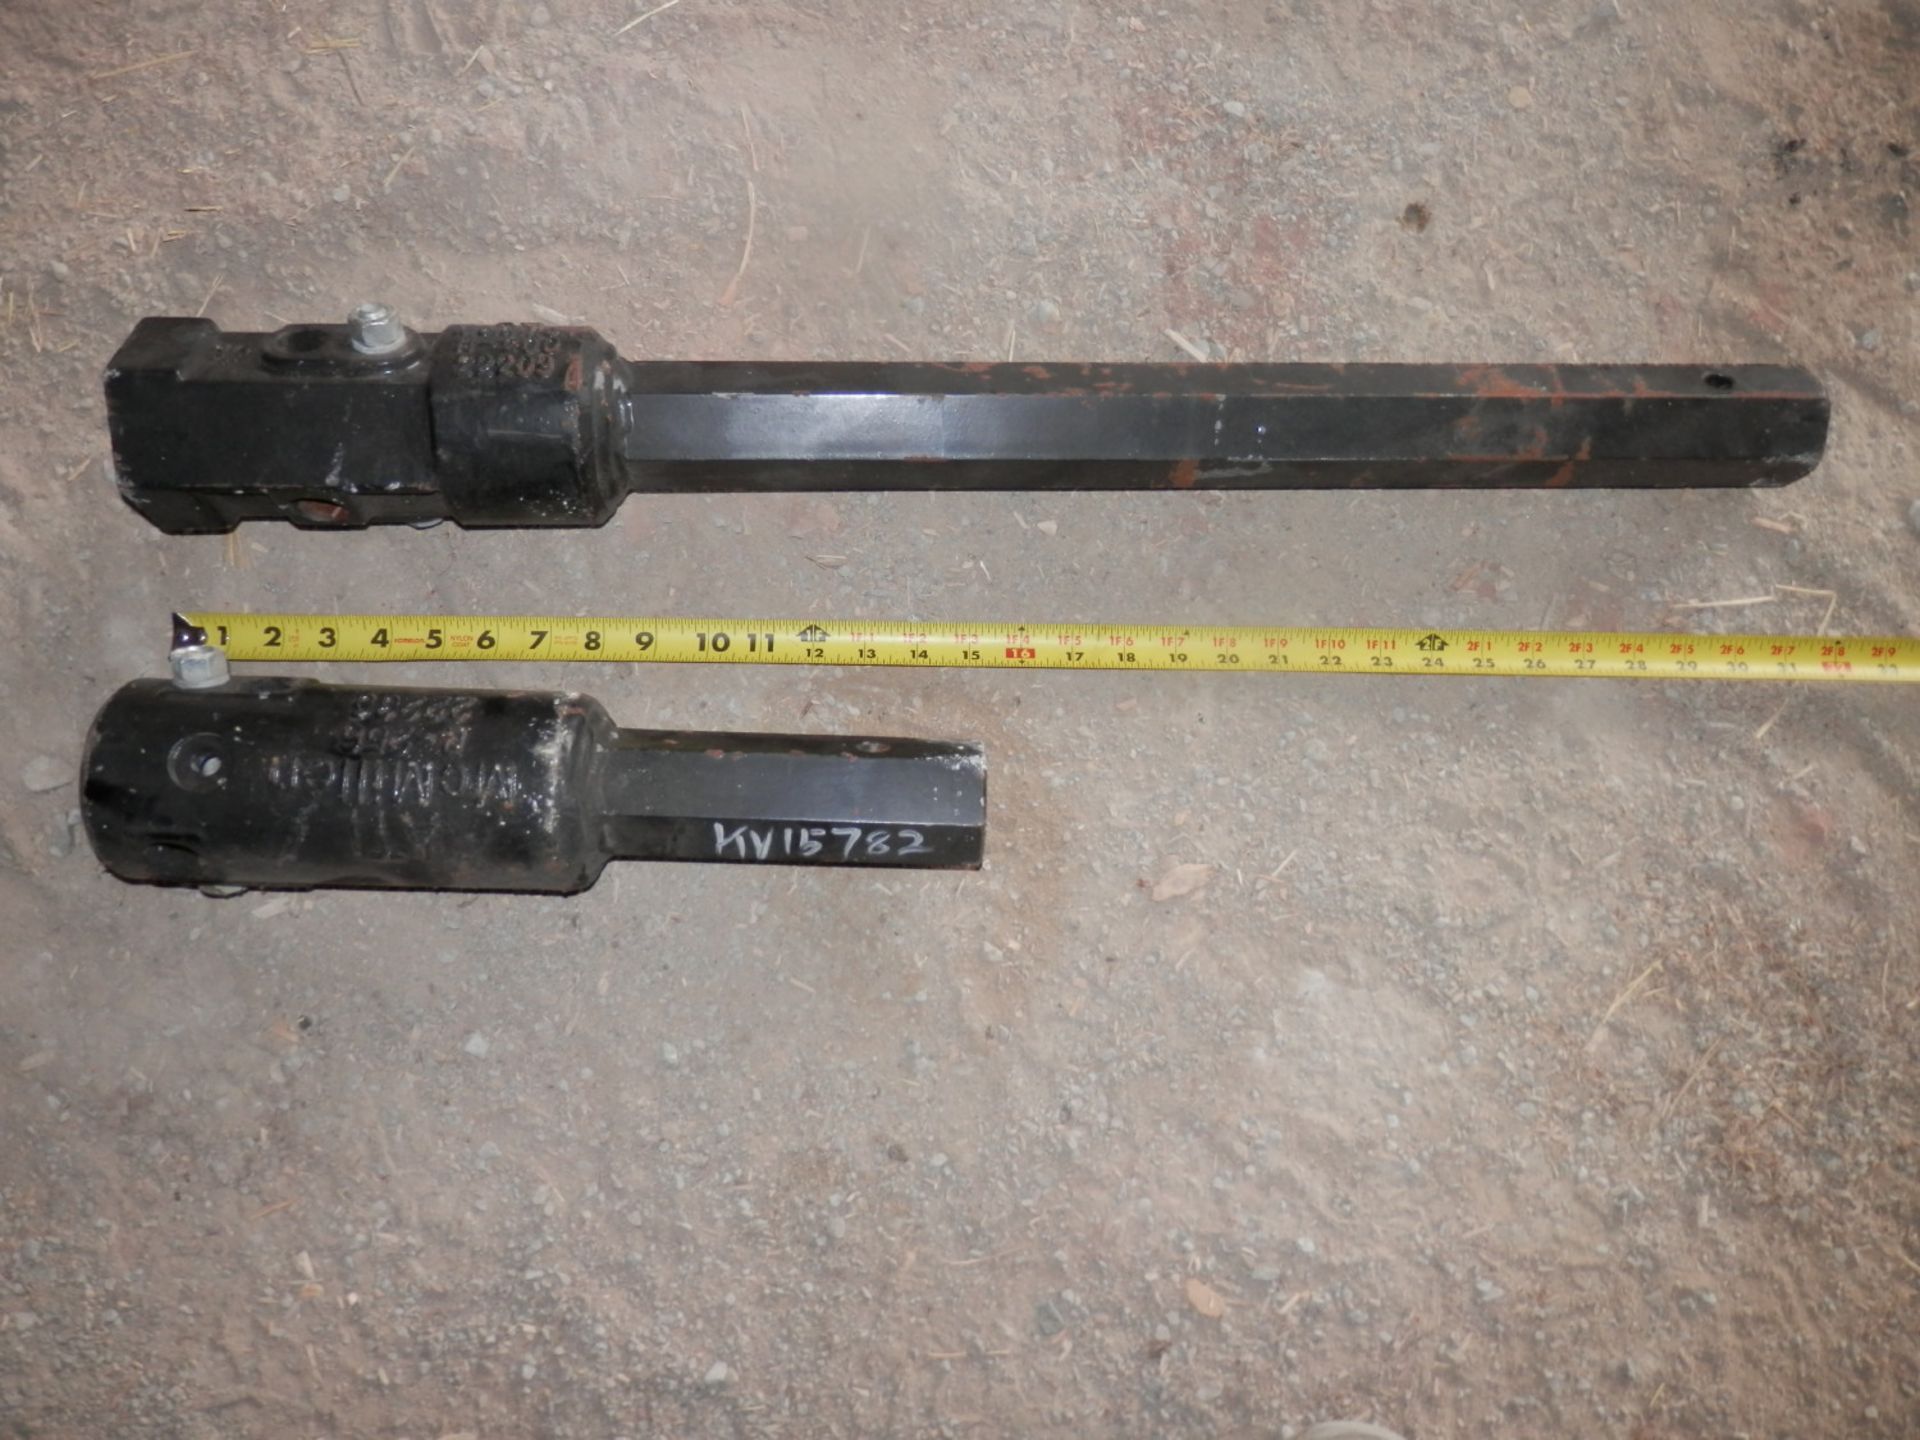 NEW 18" x 4' POST HOLE AUGER BIT w/EXTENSIONS - Image 4 of 5